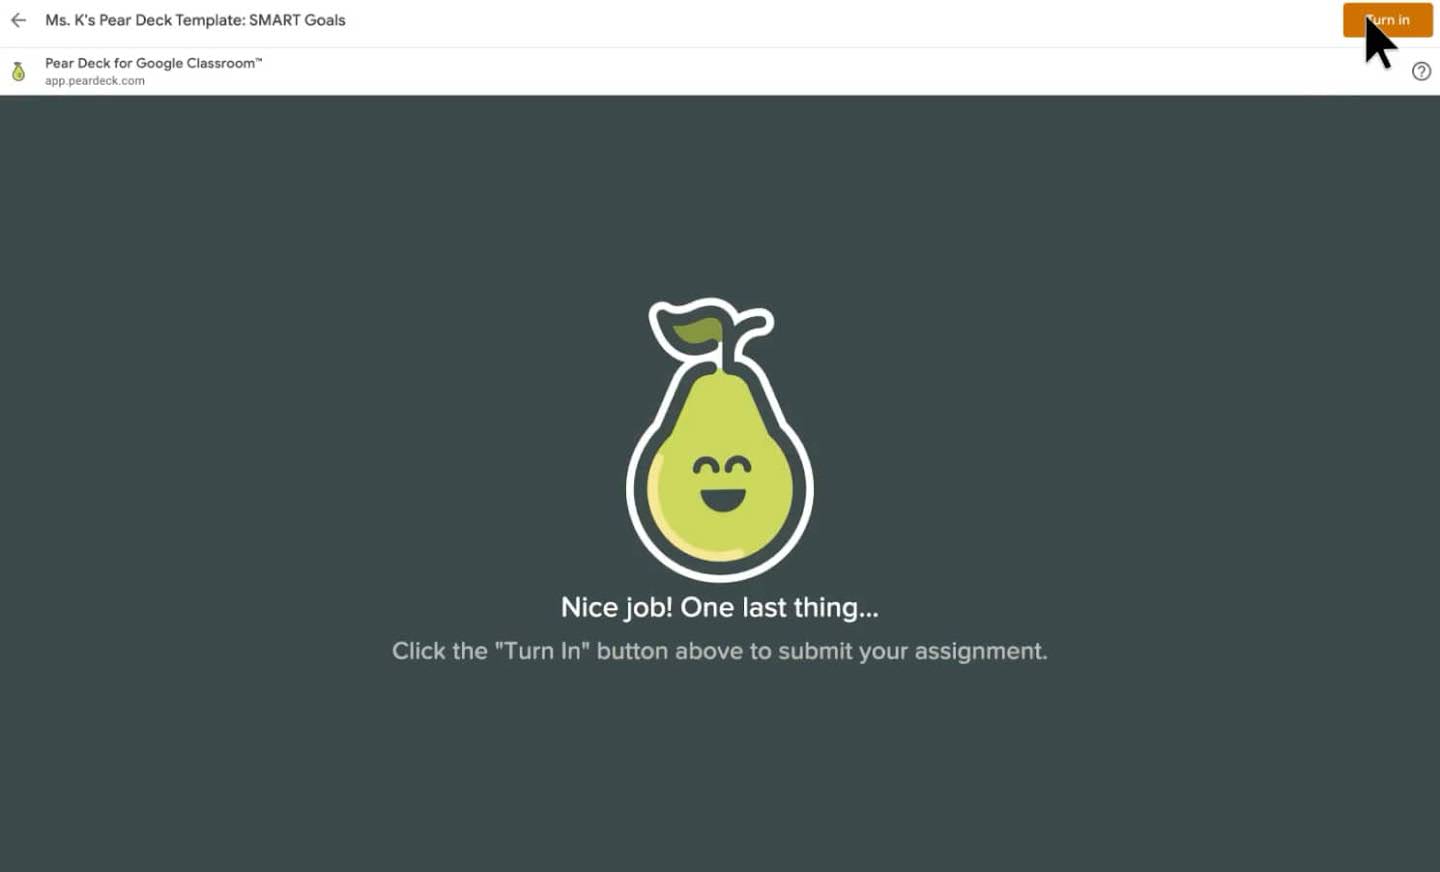 A smiling pear icon appears on the page where students can submit their assignments.